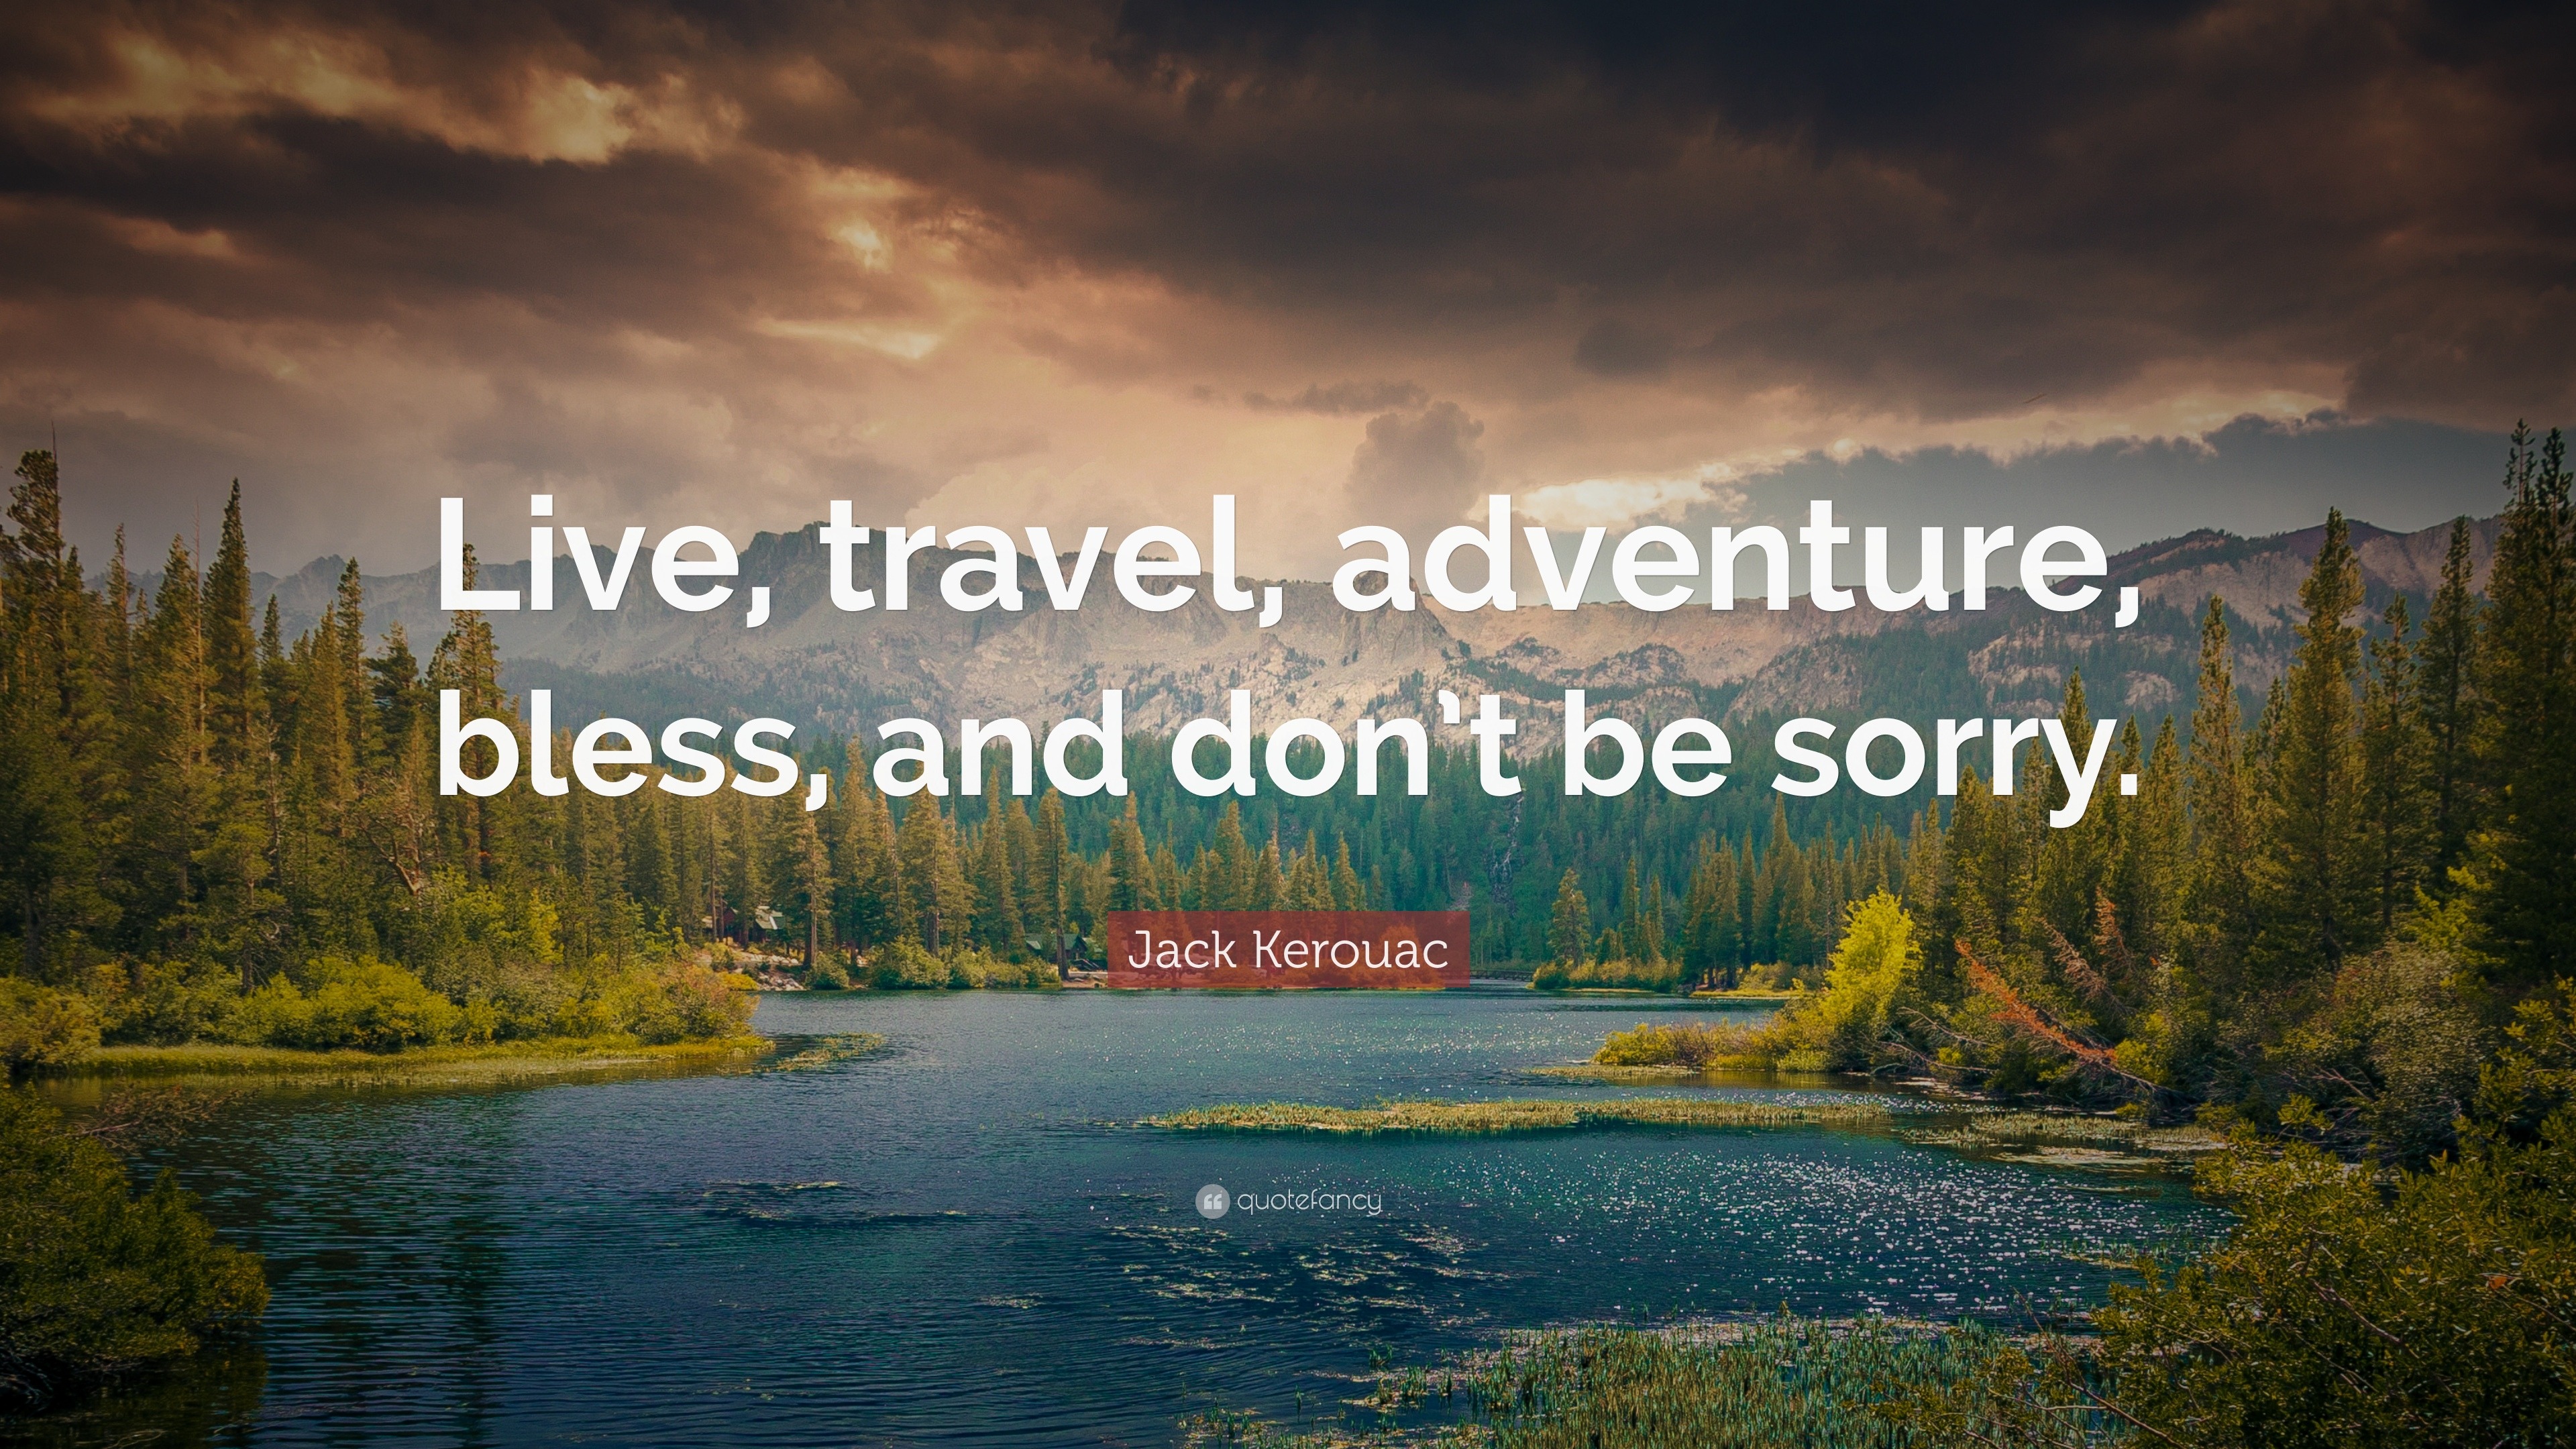 24416 Jack Kerouac Quote Live travel adventure bless and don t be sorry